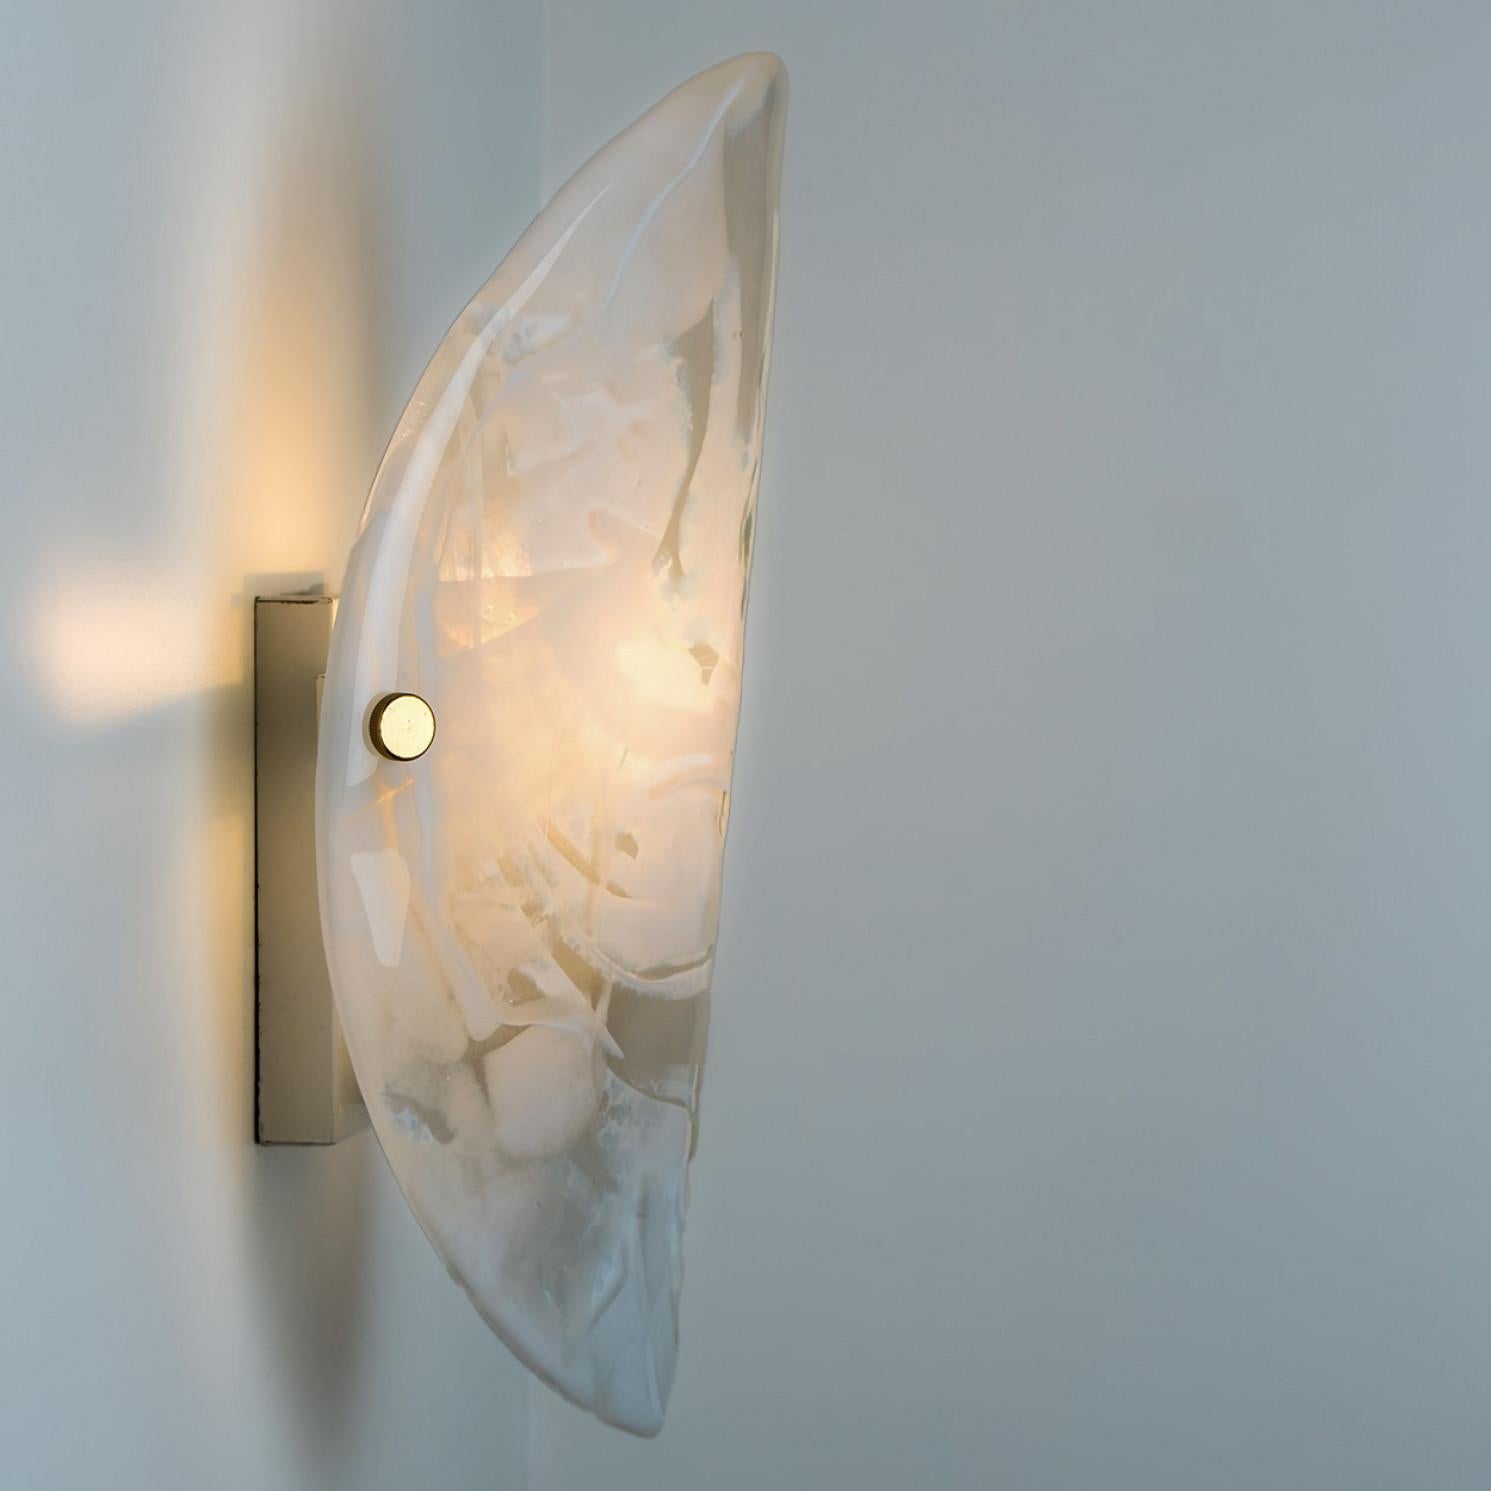 Mid-20th Century Oval Marbled Glass Wall Light by Hillebrand, Germany, 1960s For Sale